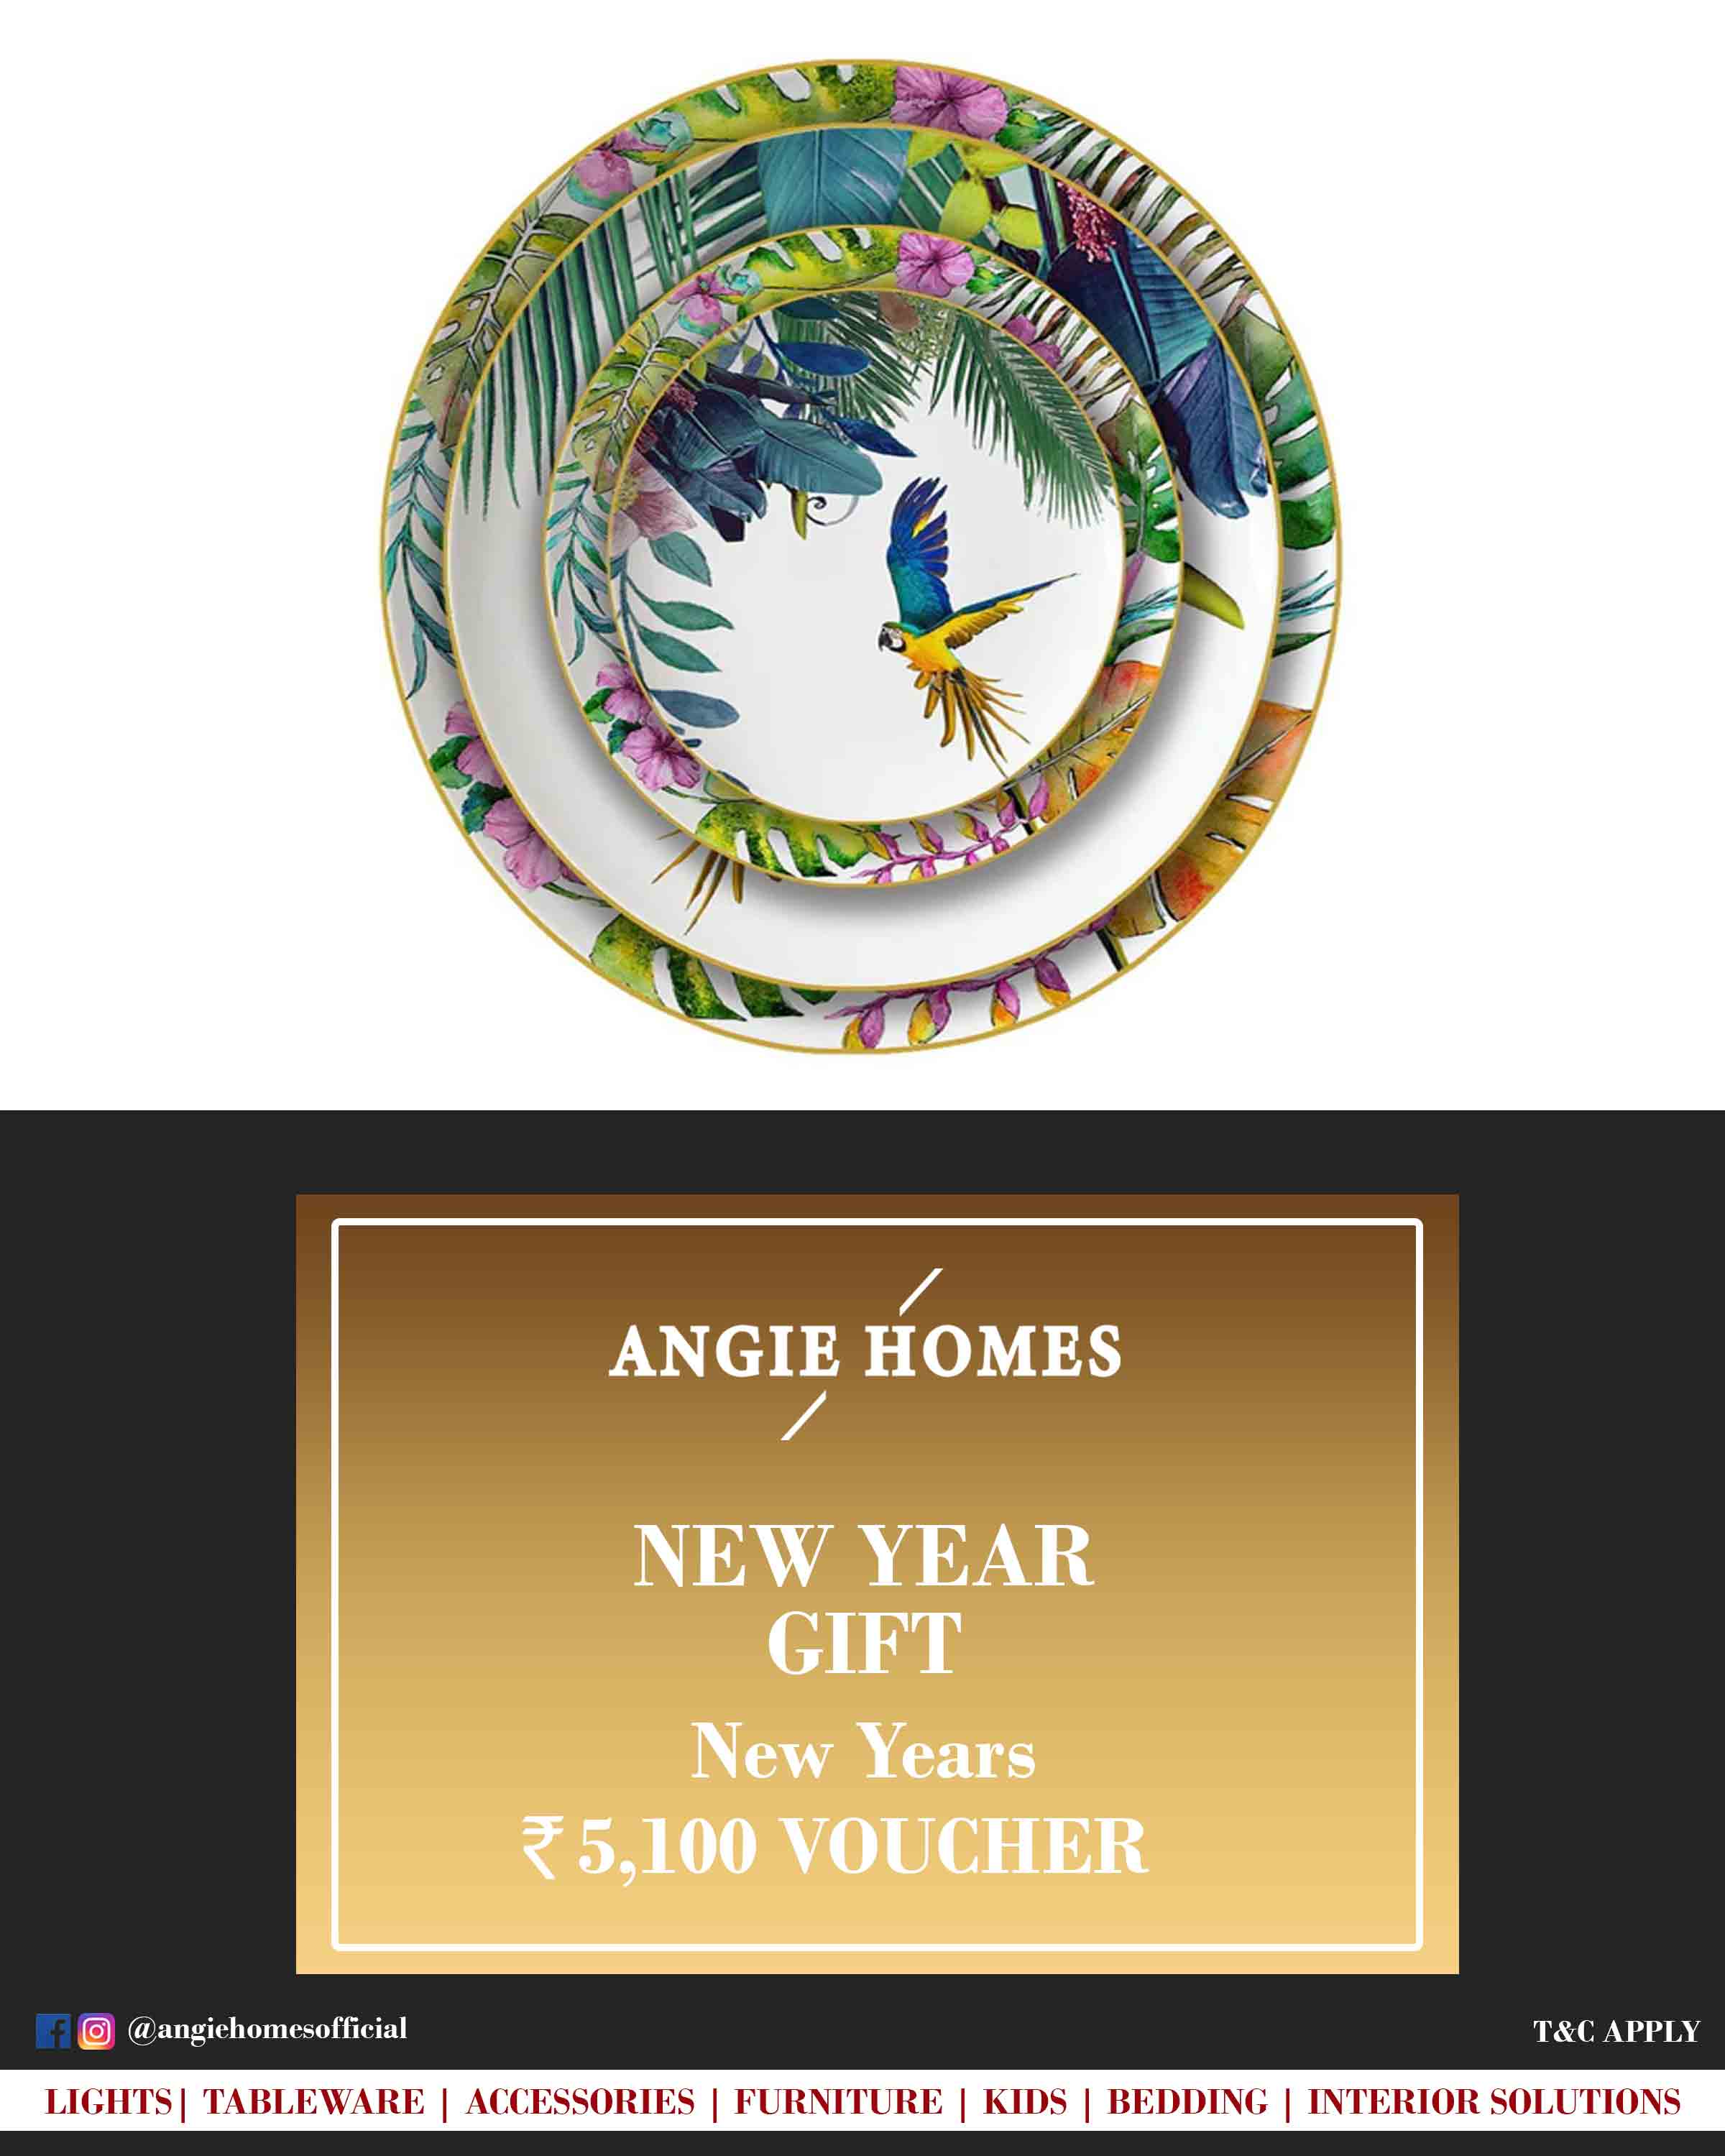 Online New Year Gift Voucher for Tableware | Peacock Plate ANGIE HOMES